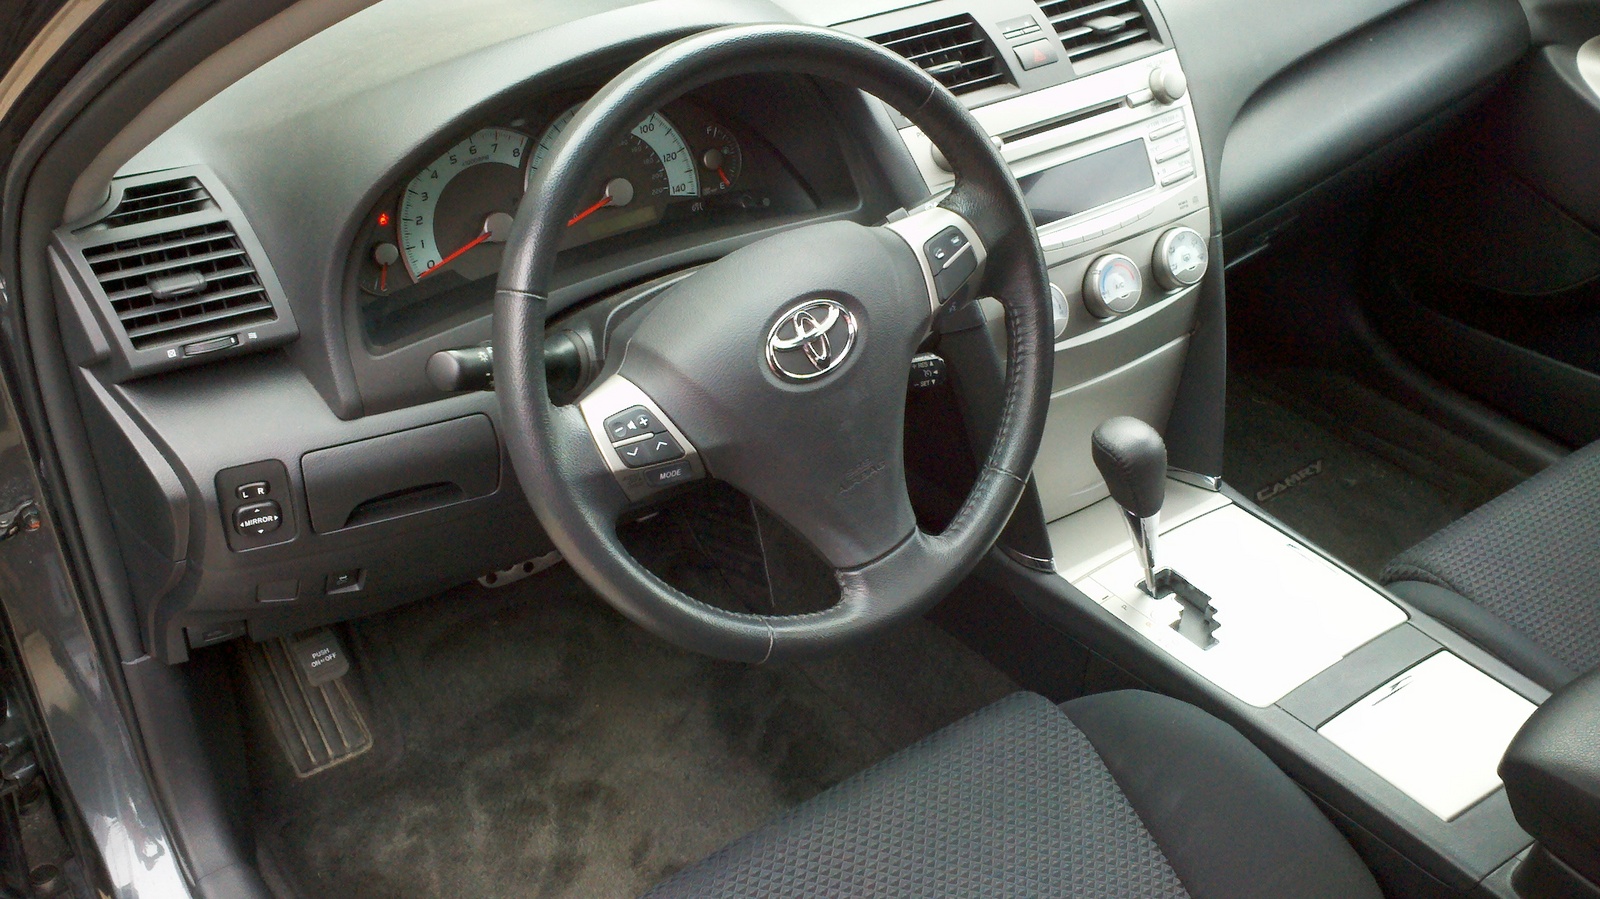 2009 toyota camry steering problems #1